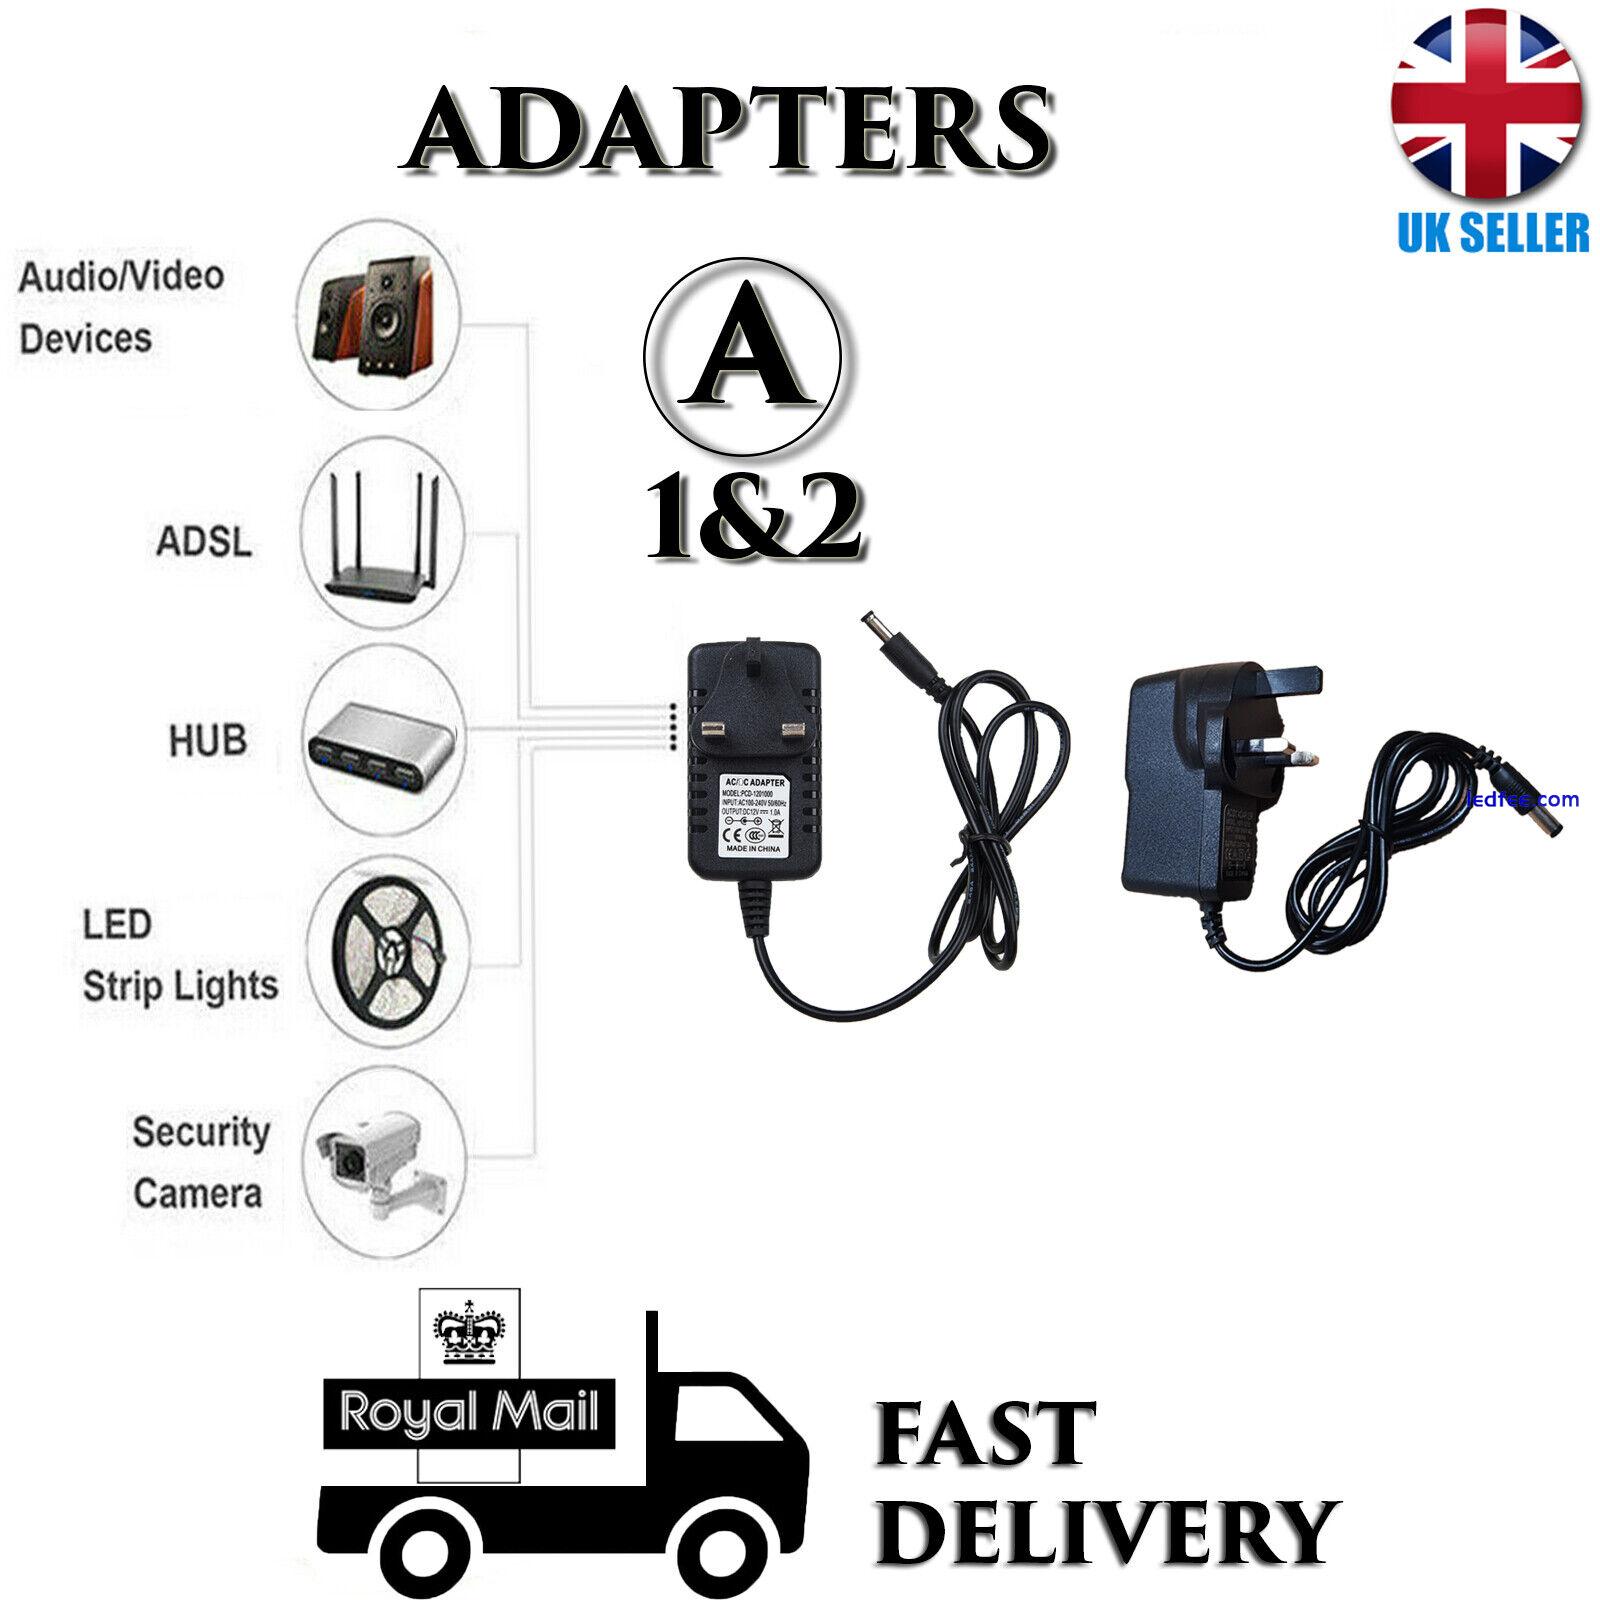 2 x 2A AC/DC UK Power Supply Adapter Safety Charger For LED Strip CCTV Camera 1 